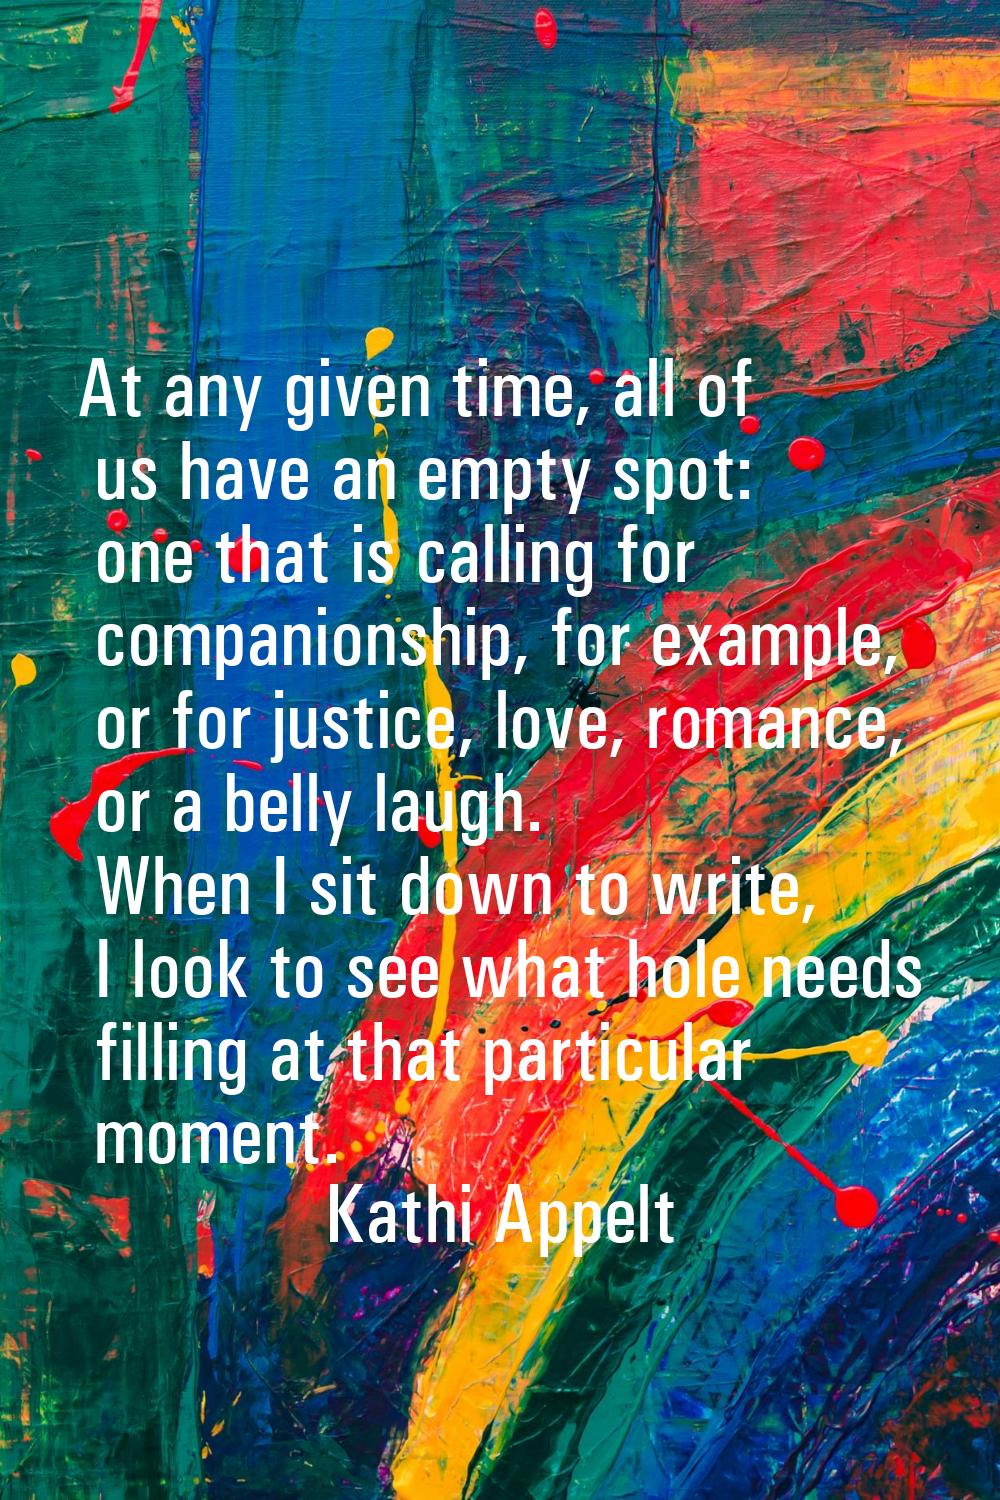 At any given time, all of us have an empty spot: one that is calling for companionship, for example